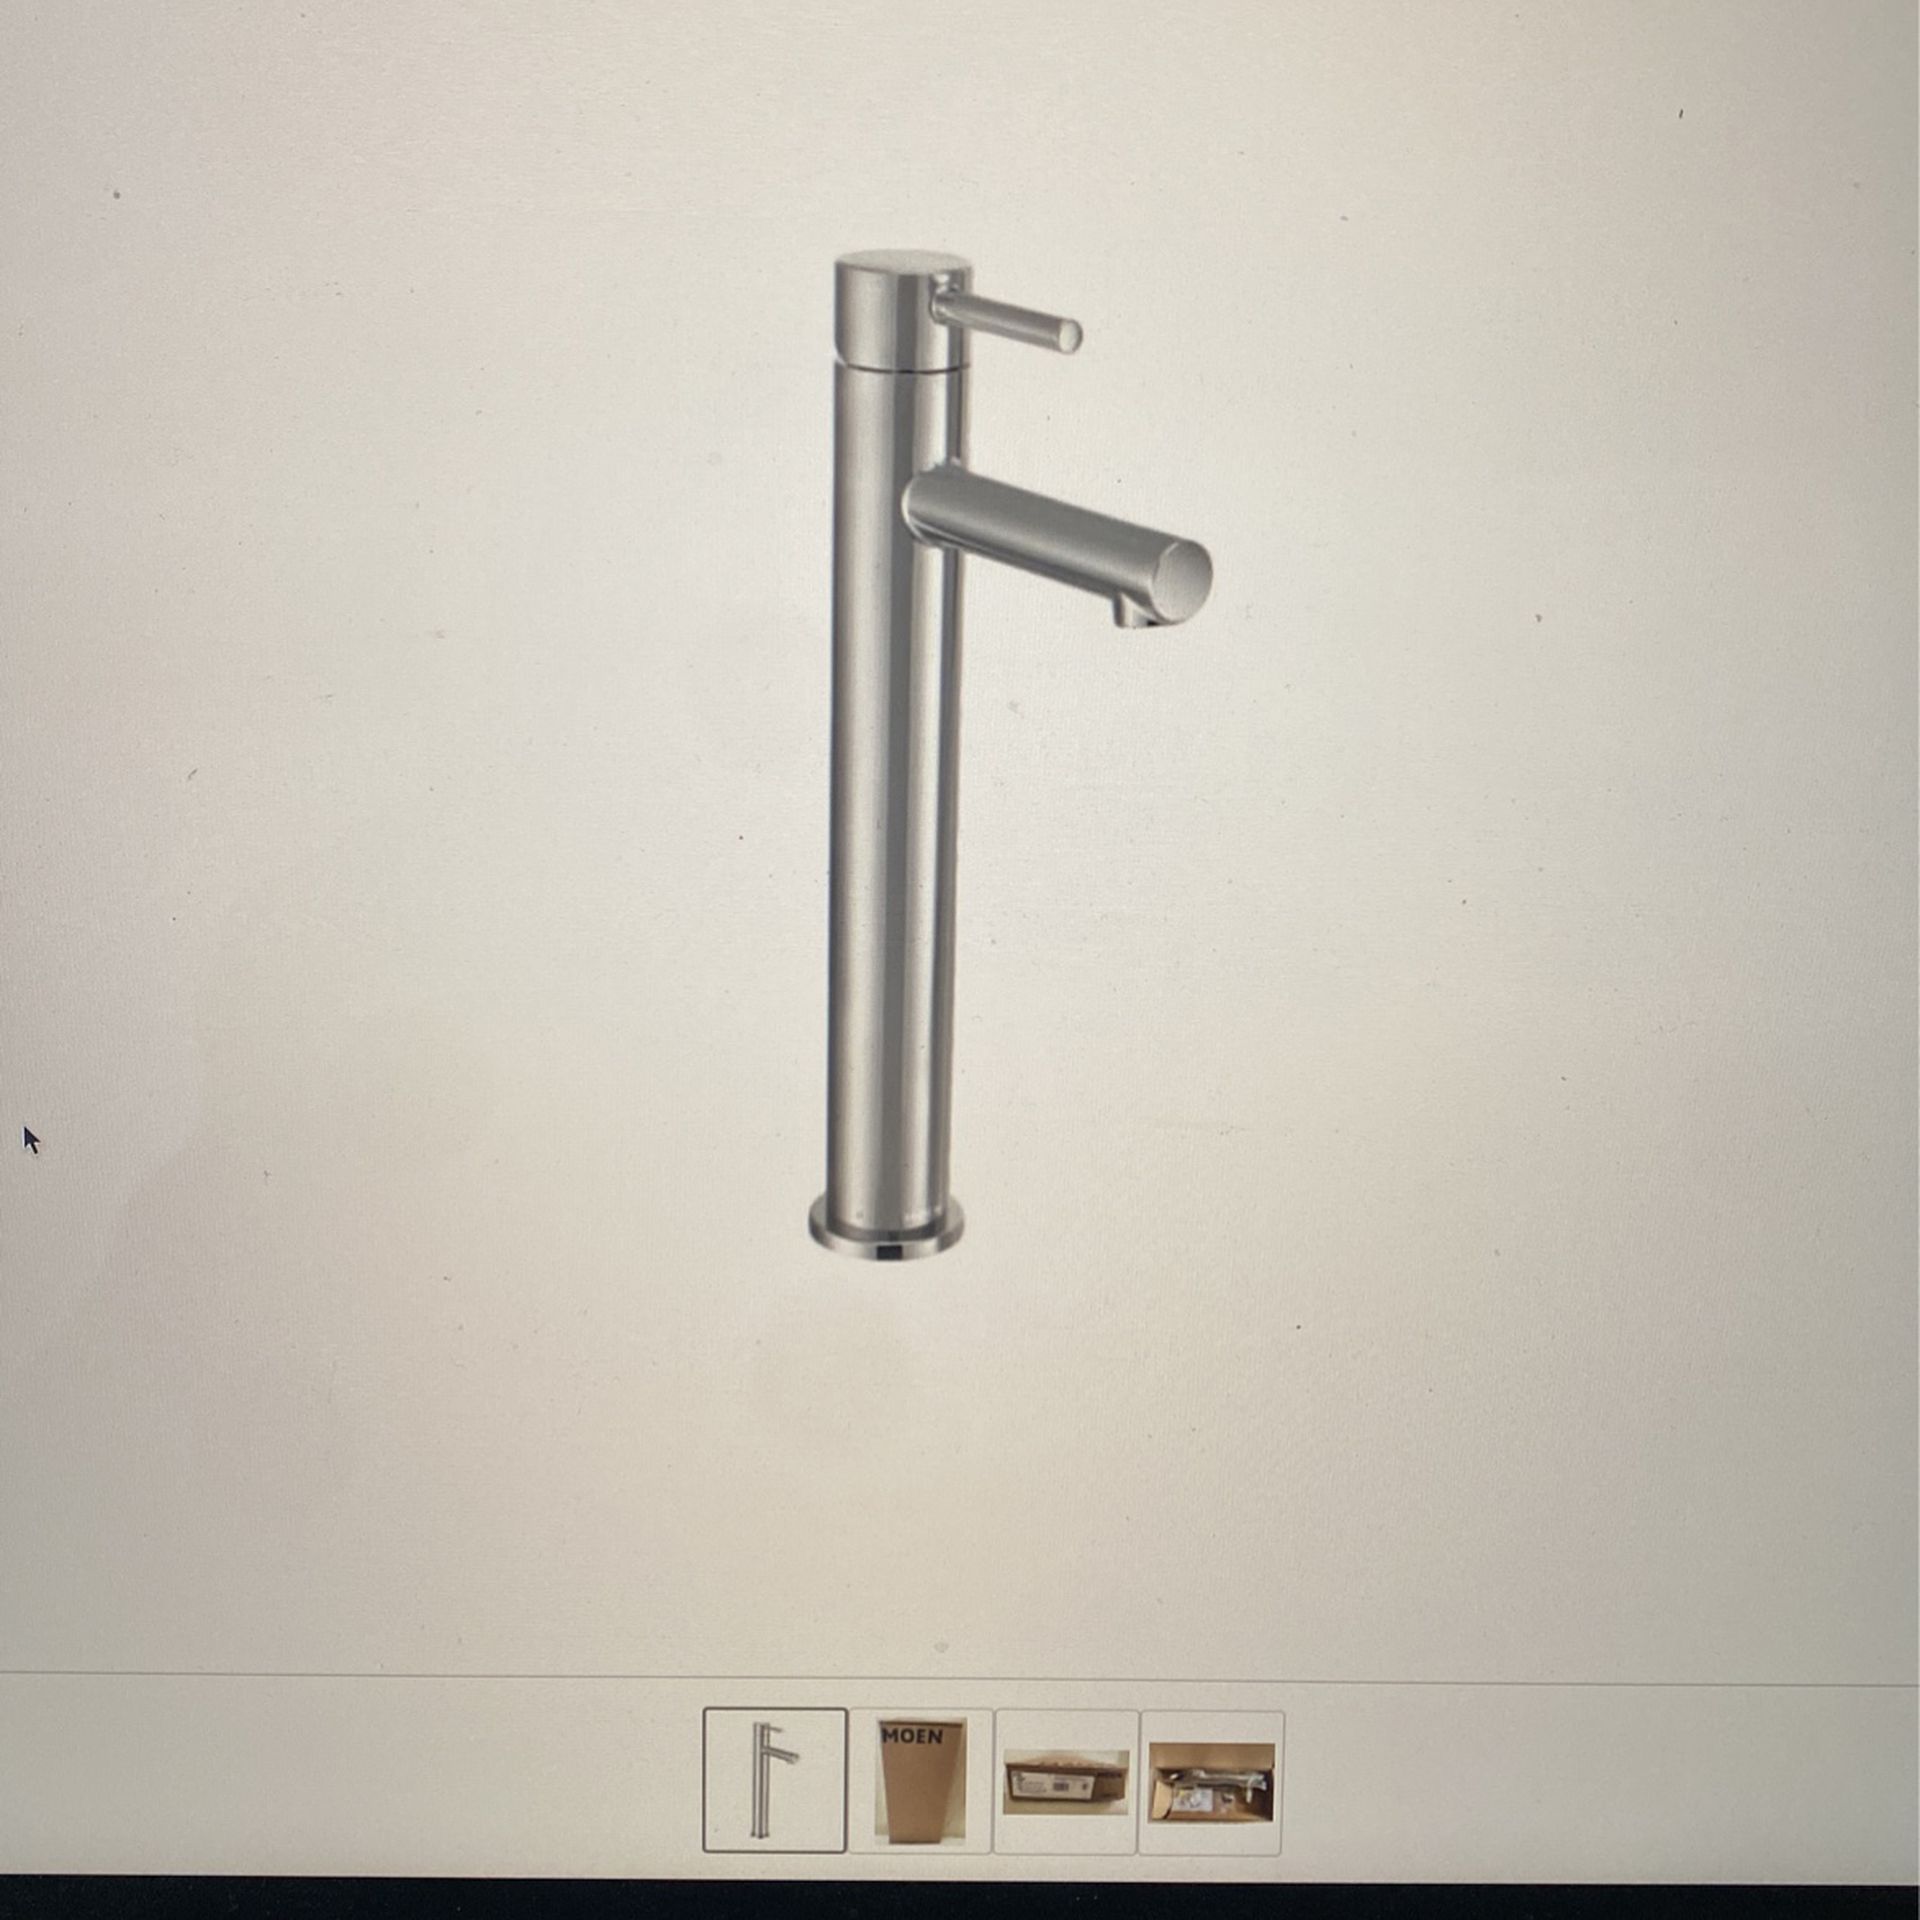 Moen 6192 single handle one whole bathroom faucet stainless steel chrome